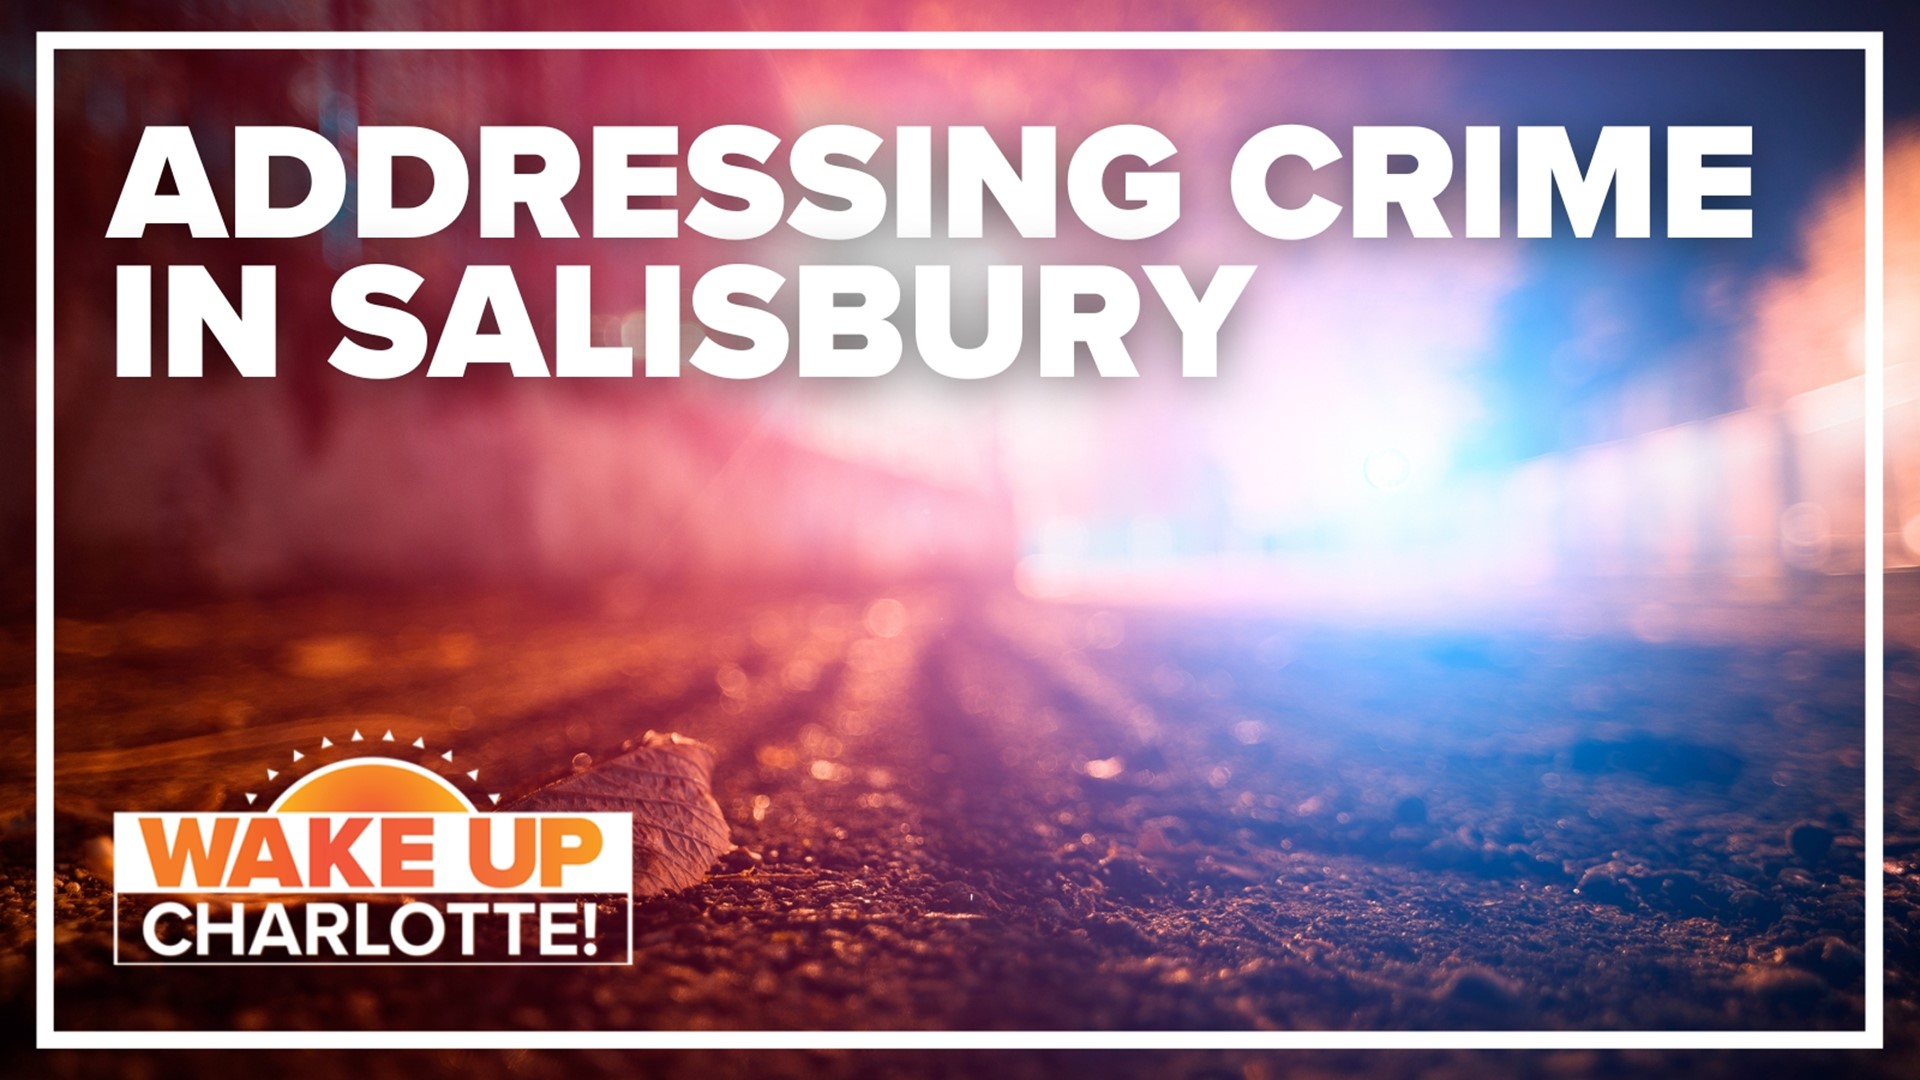 The interim Salisbury Police Chief is apologizing to the community for the recent crime.